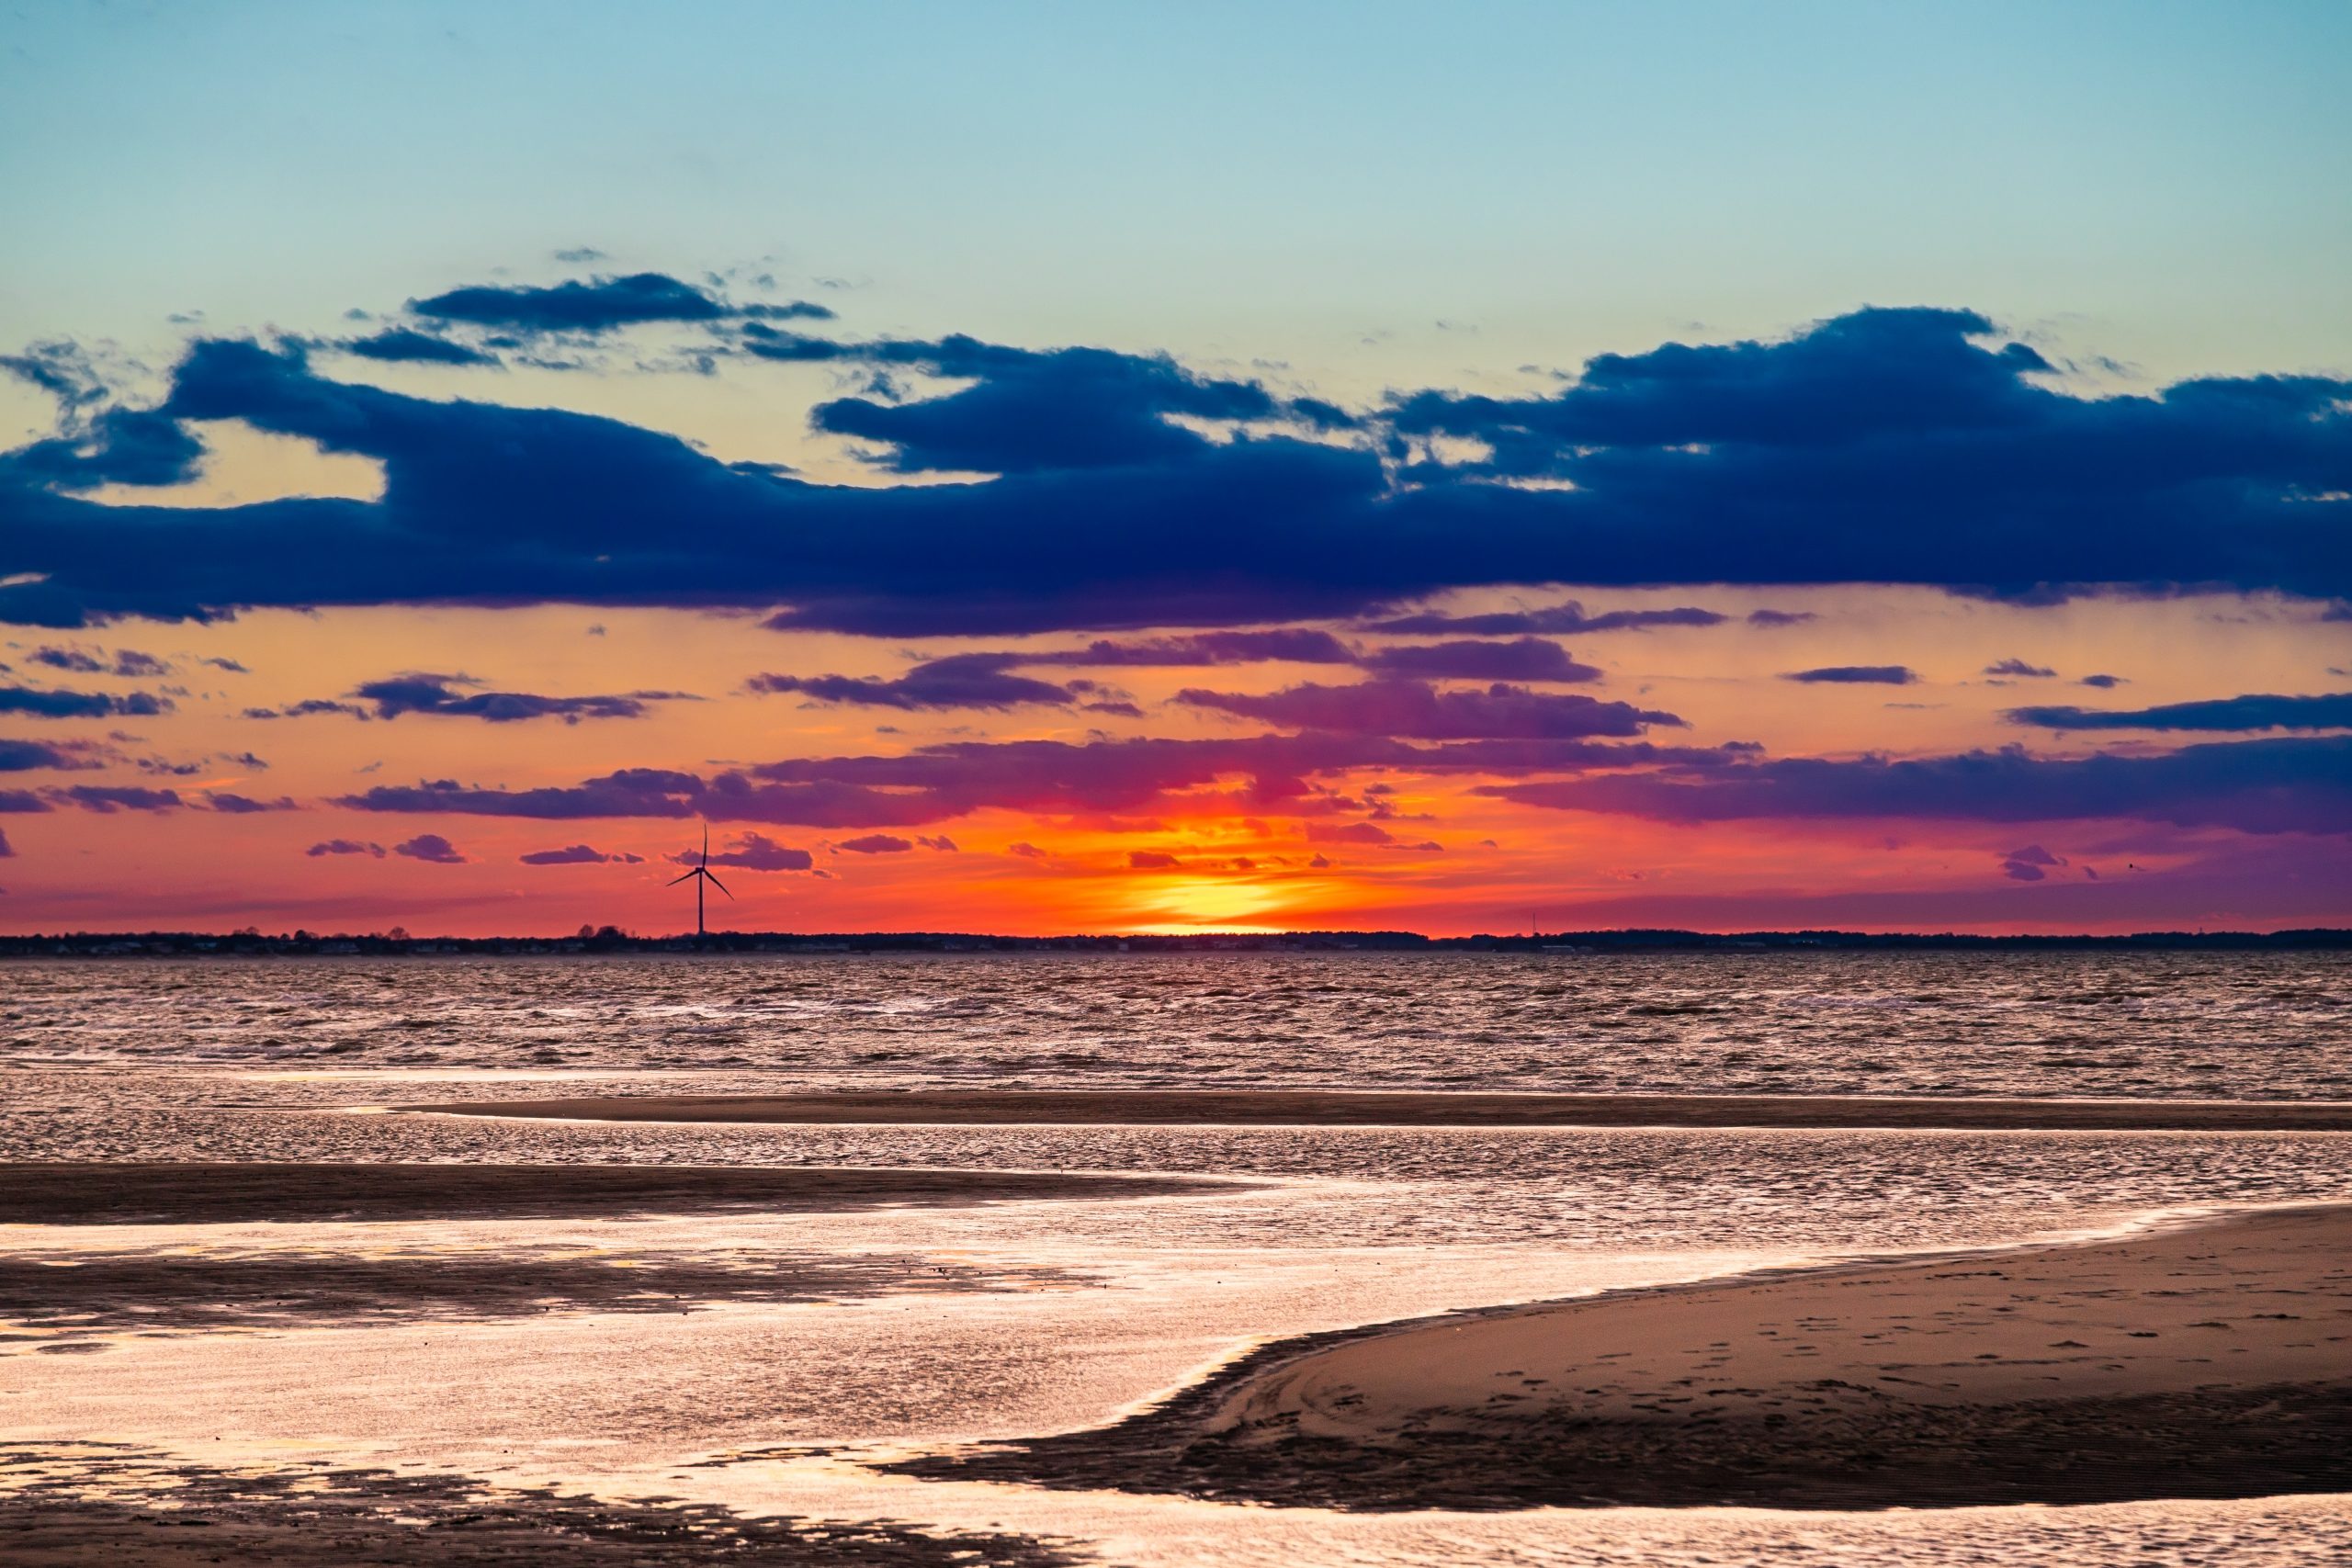 The sun sets across the water along The Point at Cape Henlopen State Park. The sunset is seen from The Point's sandbars.